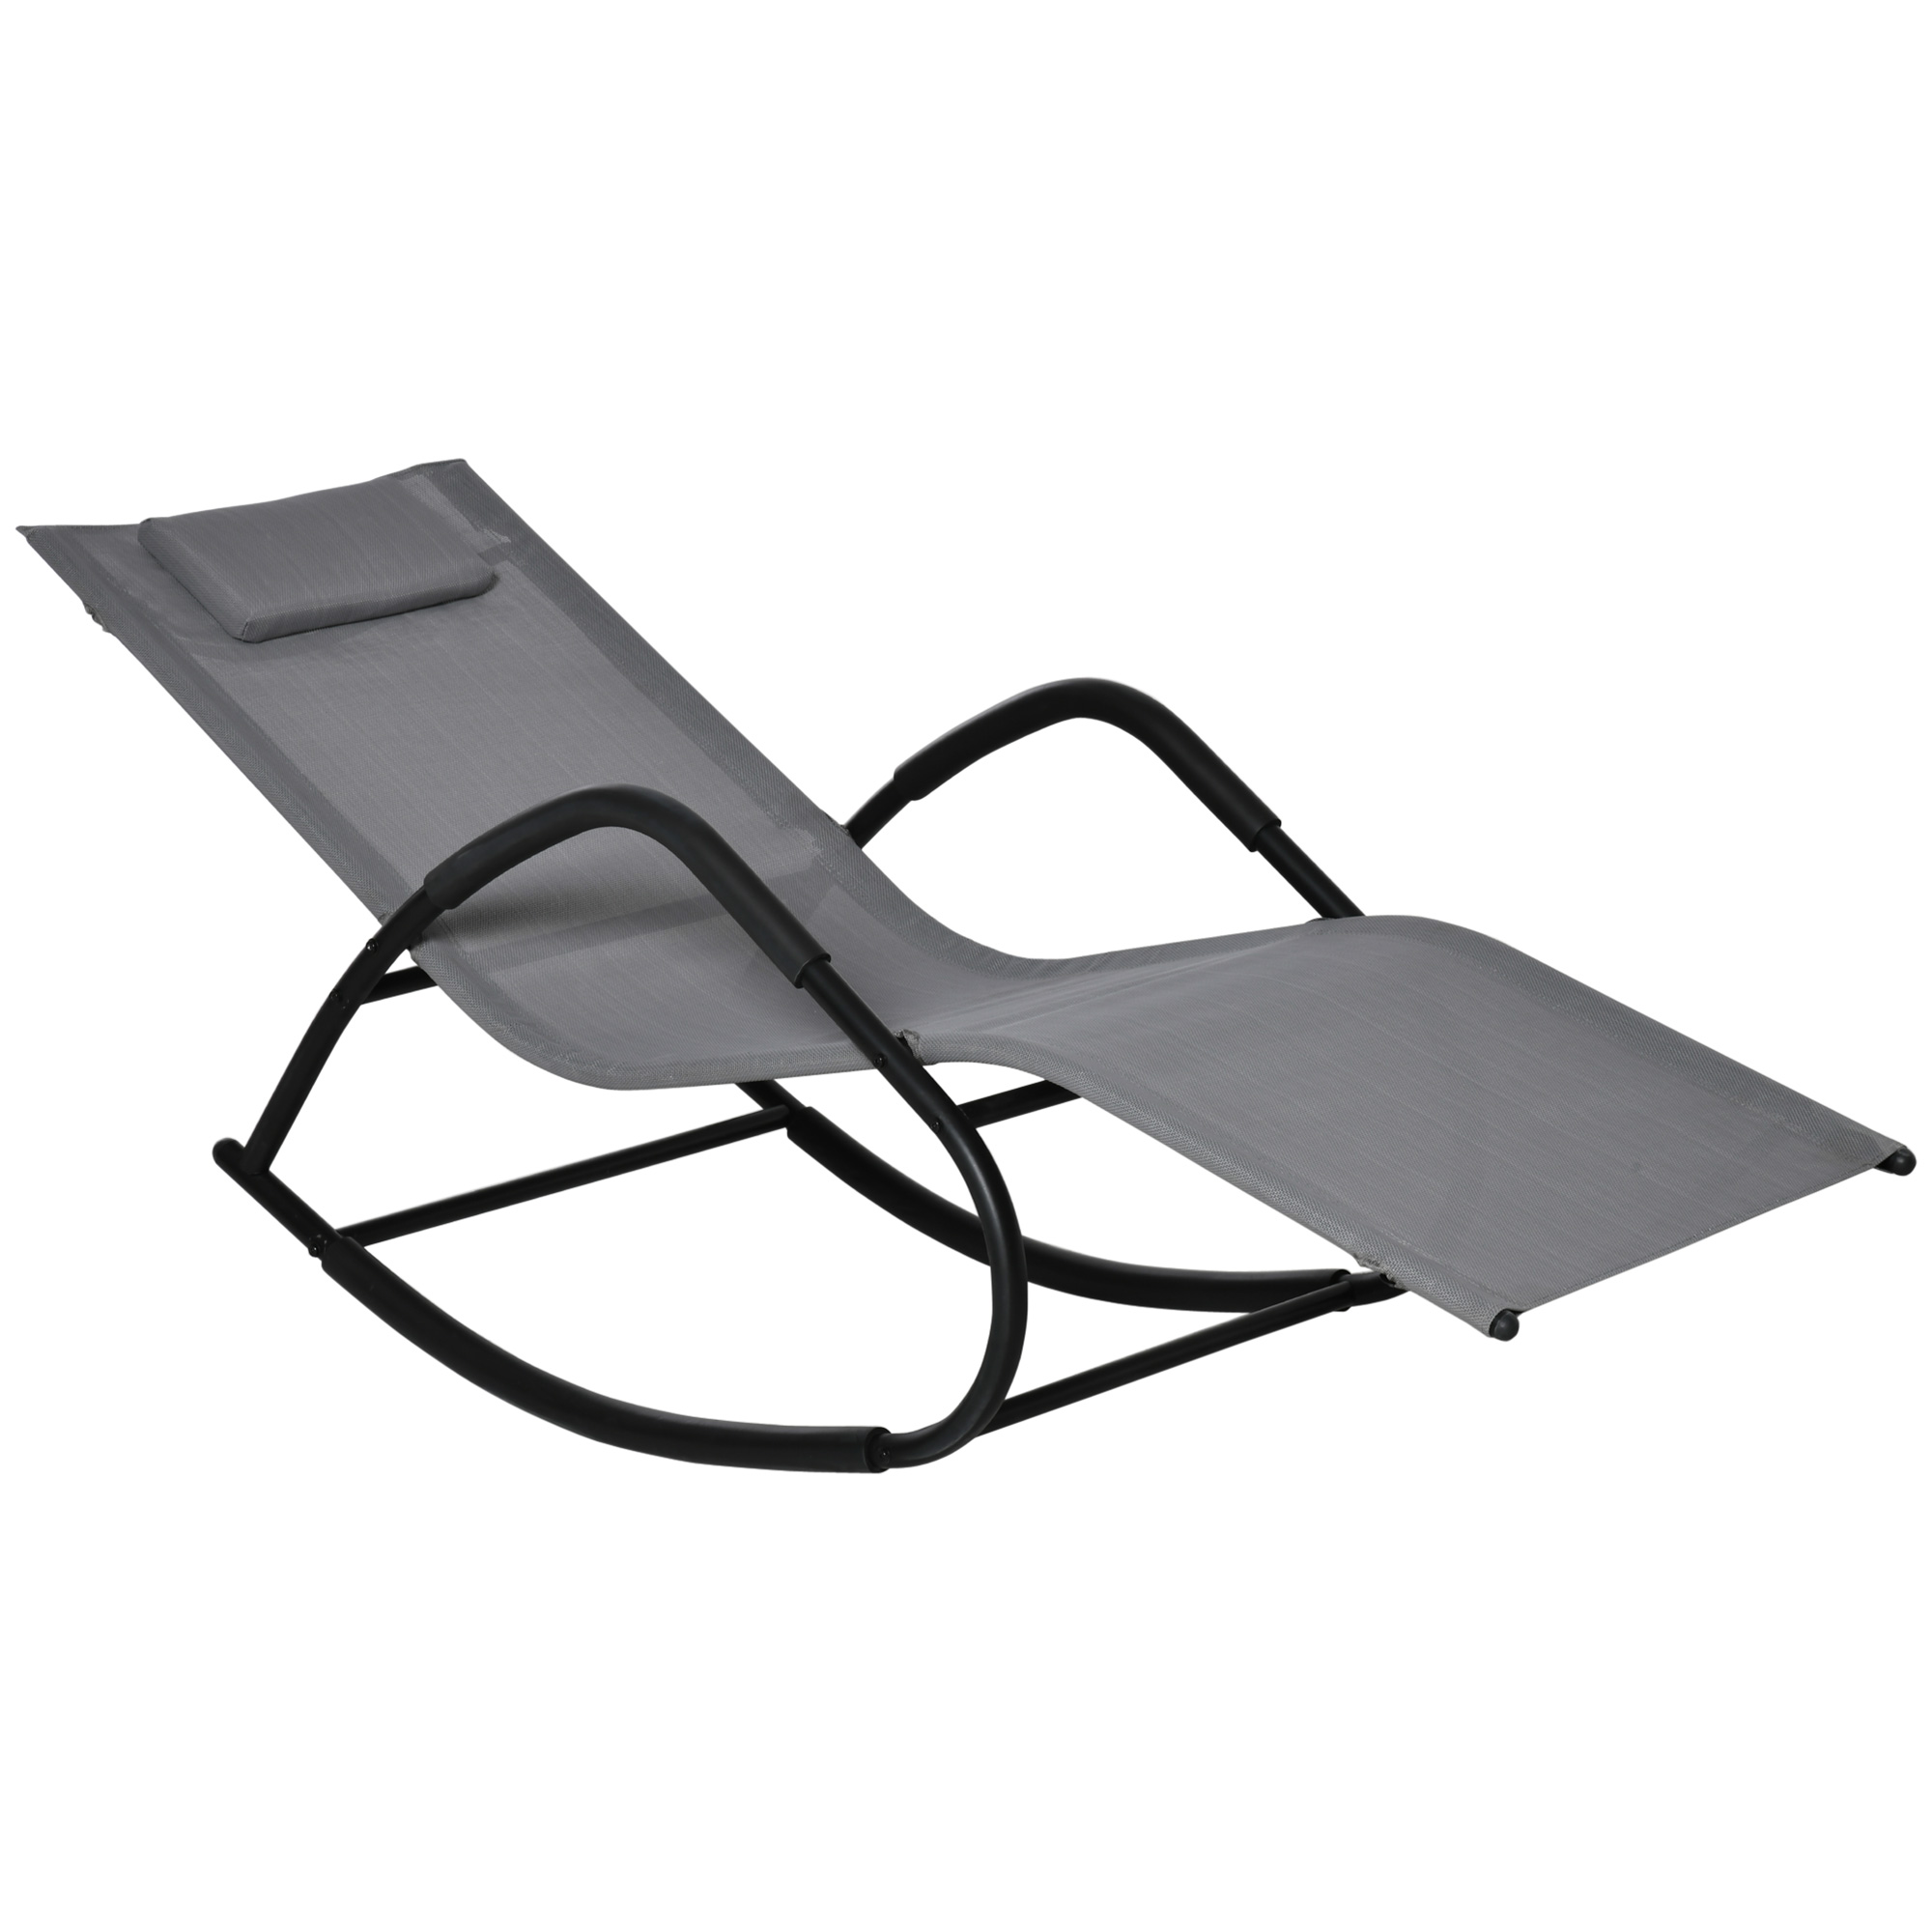 Outsunny Rocking Chair for Sunbathing, Lawn, Garden or Pool, Gray - image 1 of 9